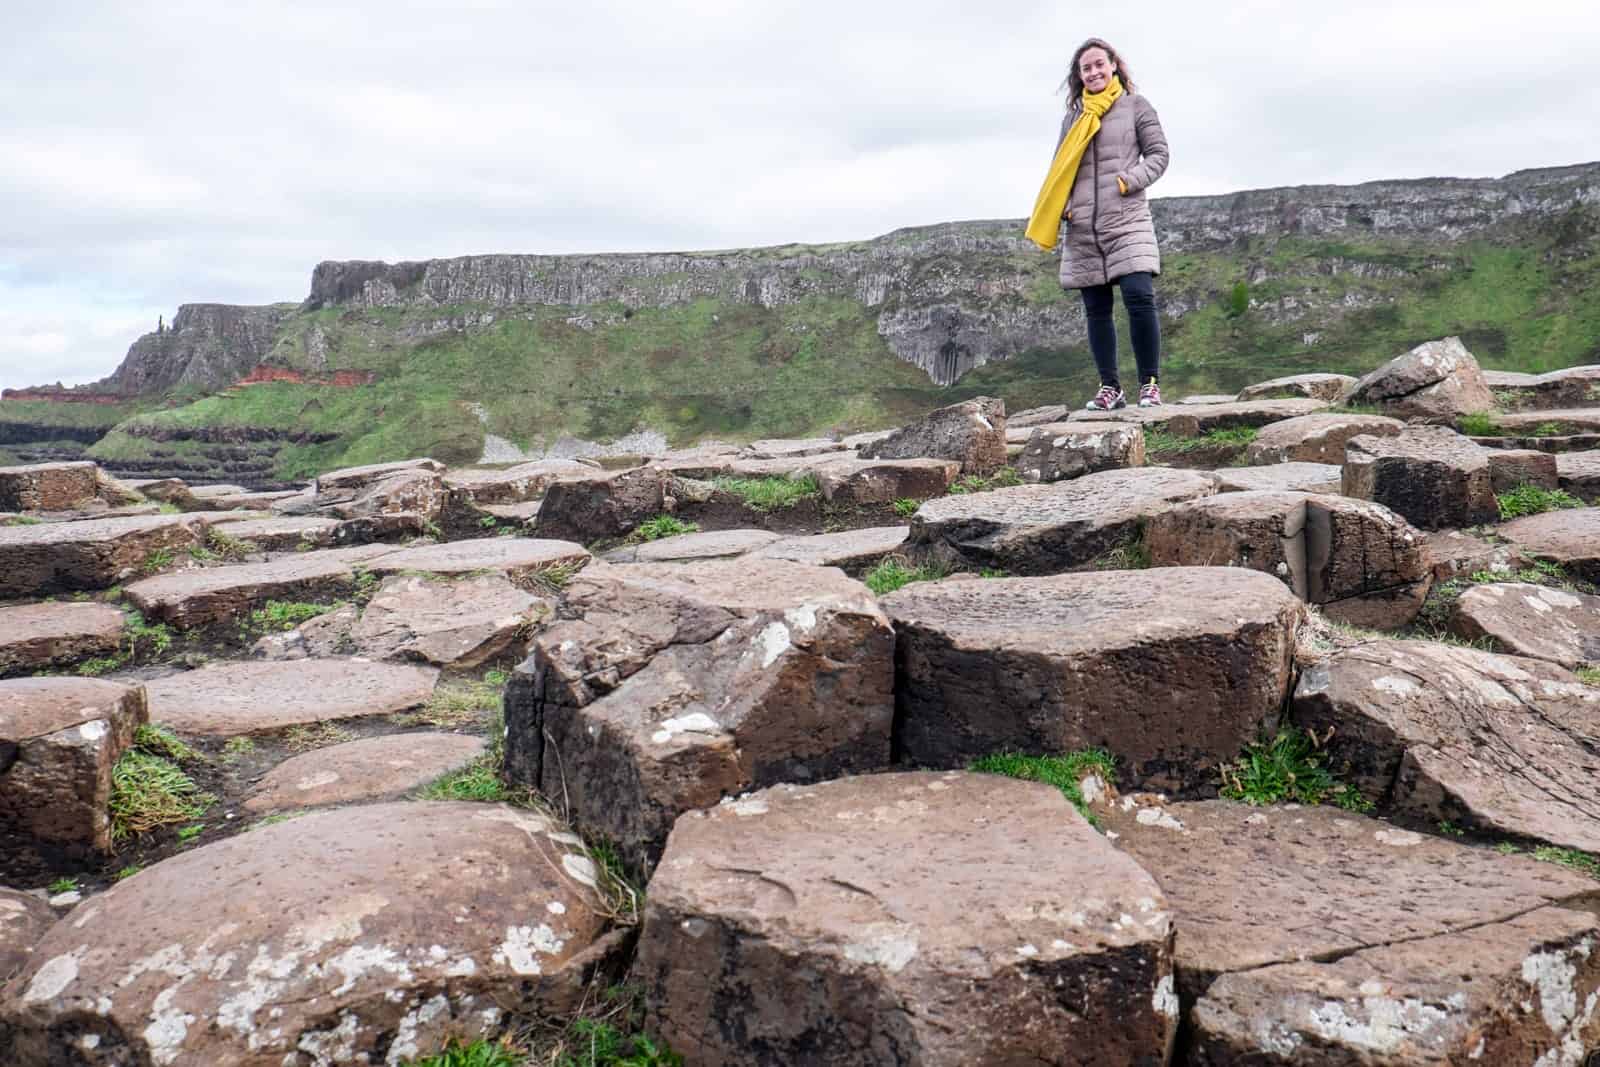 Standing on the Giants Causeway in Northern Ireland